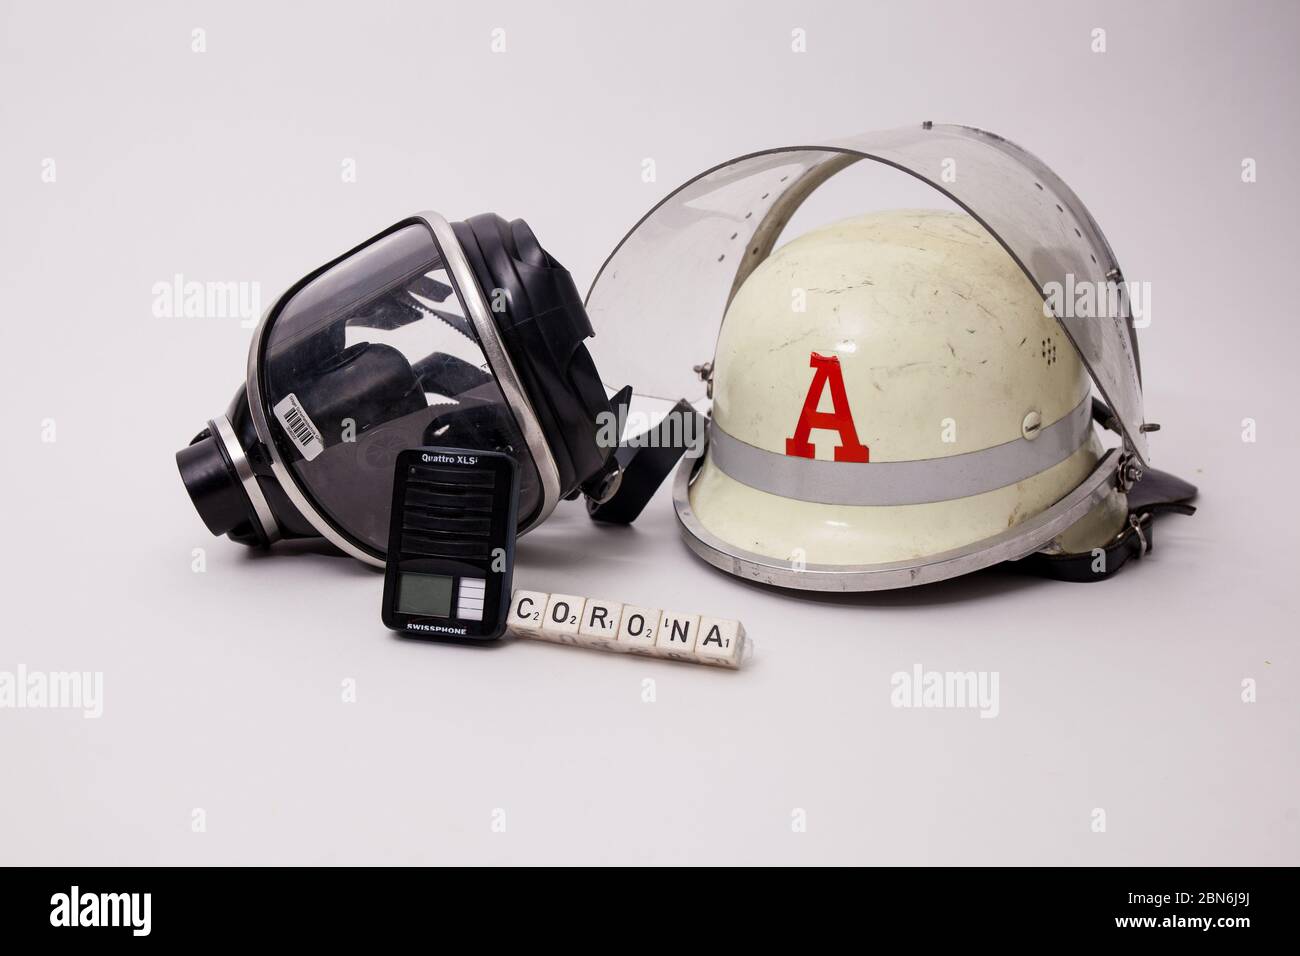 Deutschland. 11th May, 2020. Germany 11.05.2020: Symbols - 2020 operational readiness of the fire brigade/radio signal receiver/respirator mask/helmet/fire/accident/security/ready 24 hours a day/helper/fire brigade/in use even during the corona virus/Covid 19/| usage worldwide Credit: dpa/Alamy Live News Stock Photo